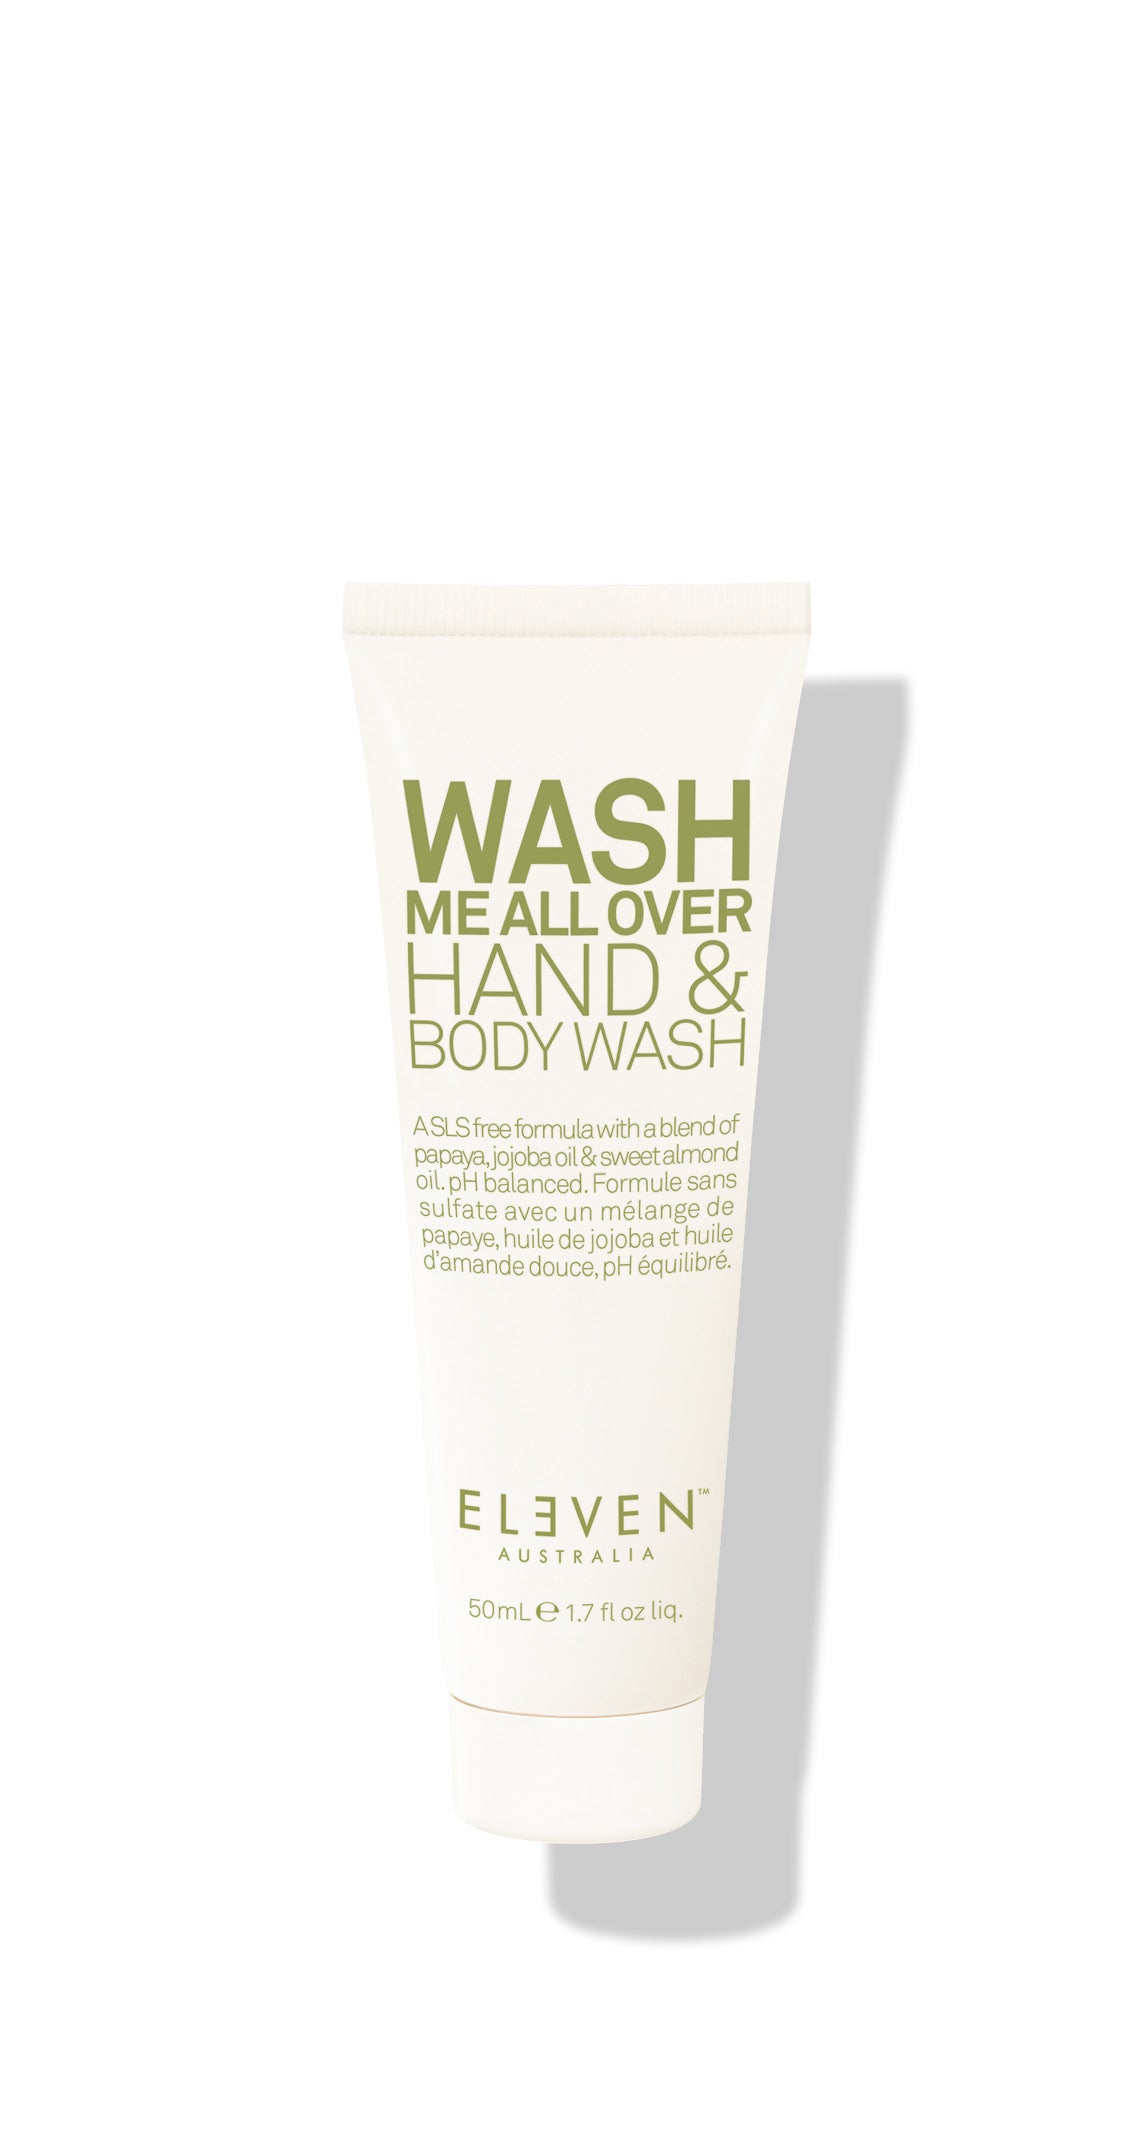 ELEVEN Hair WASH ME ALL OVER HAND AND BODY WASH is Ph balanced, SLS free formula